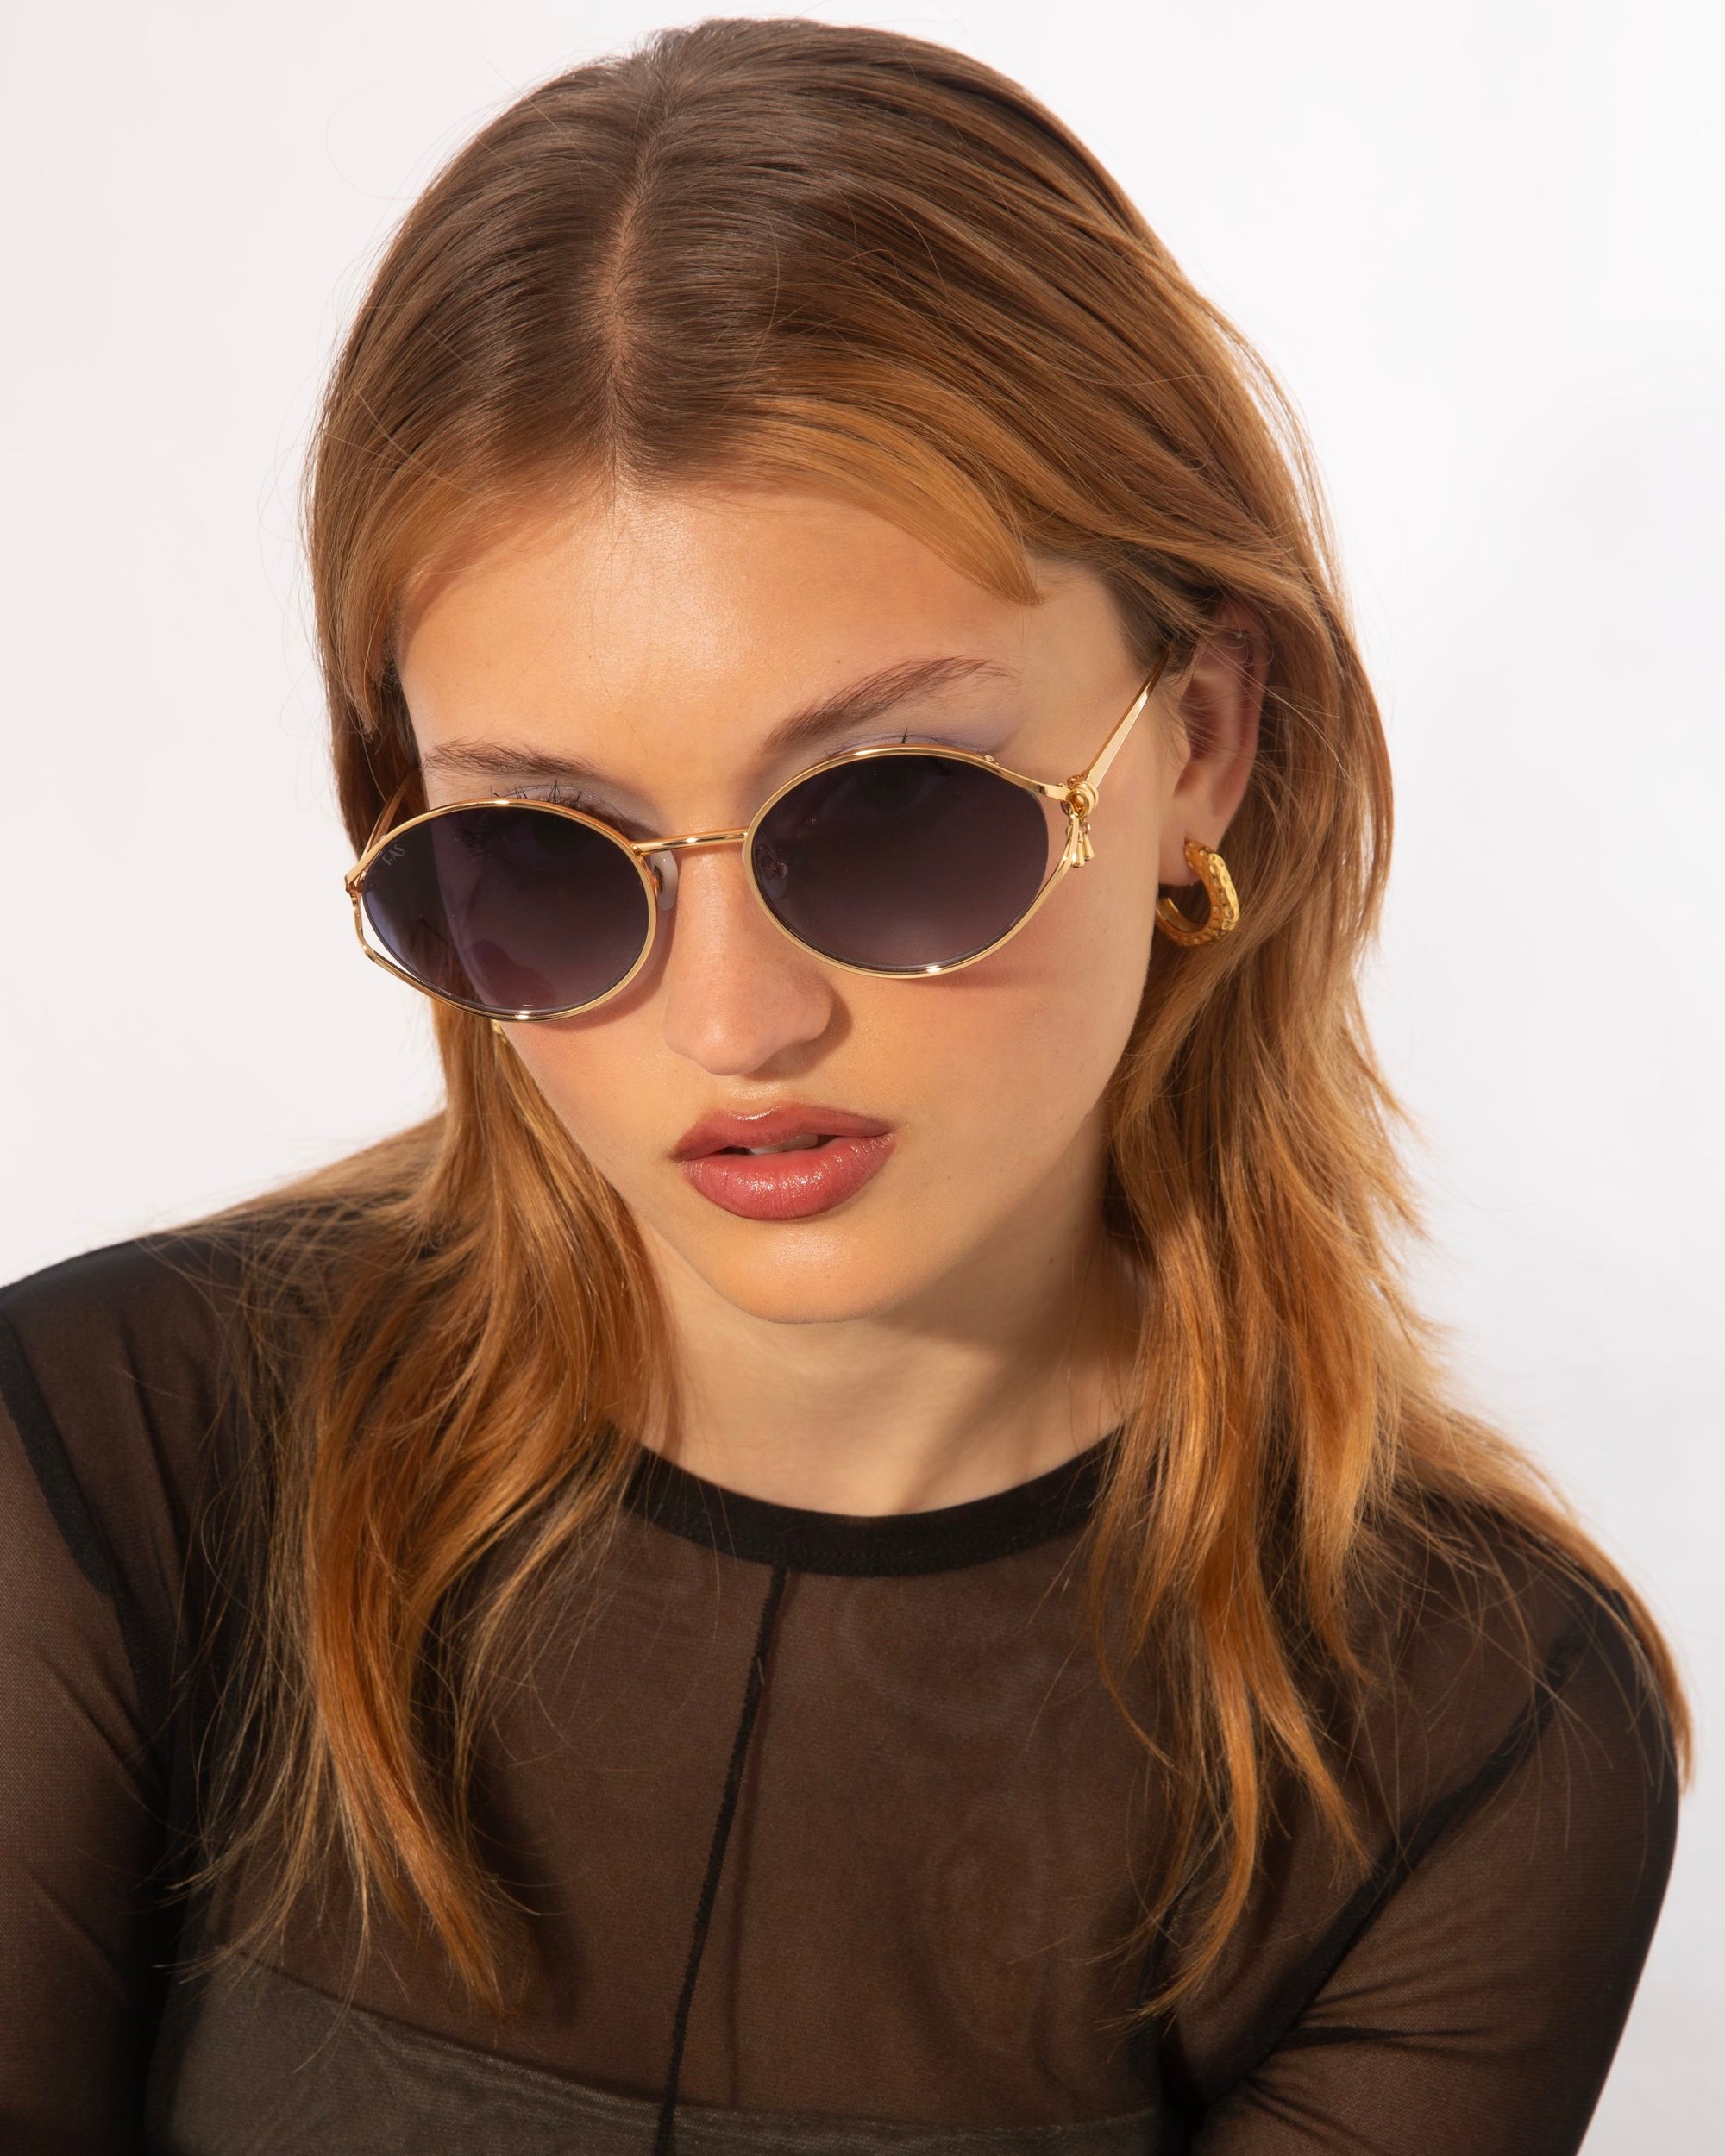 A person with long, light brown hair is wearing round Sky sunglasses by For Art's Sake® featuring jade-stone nose pads and 18-karat gold plating, along with small gold hoop earrings. They are dressed in a black, semi-sheer top and looking slightly downward against a plain white background.